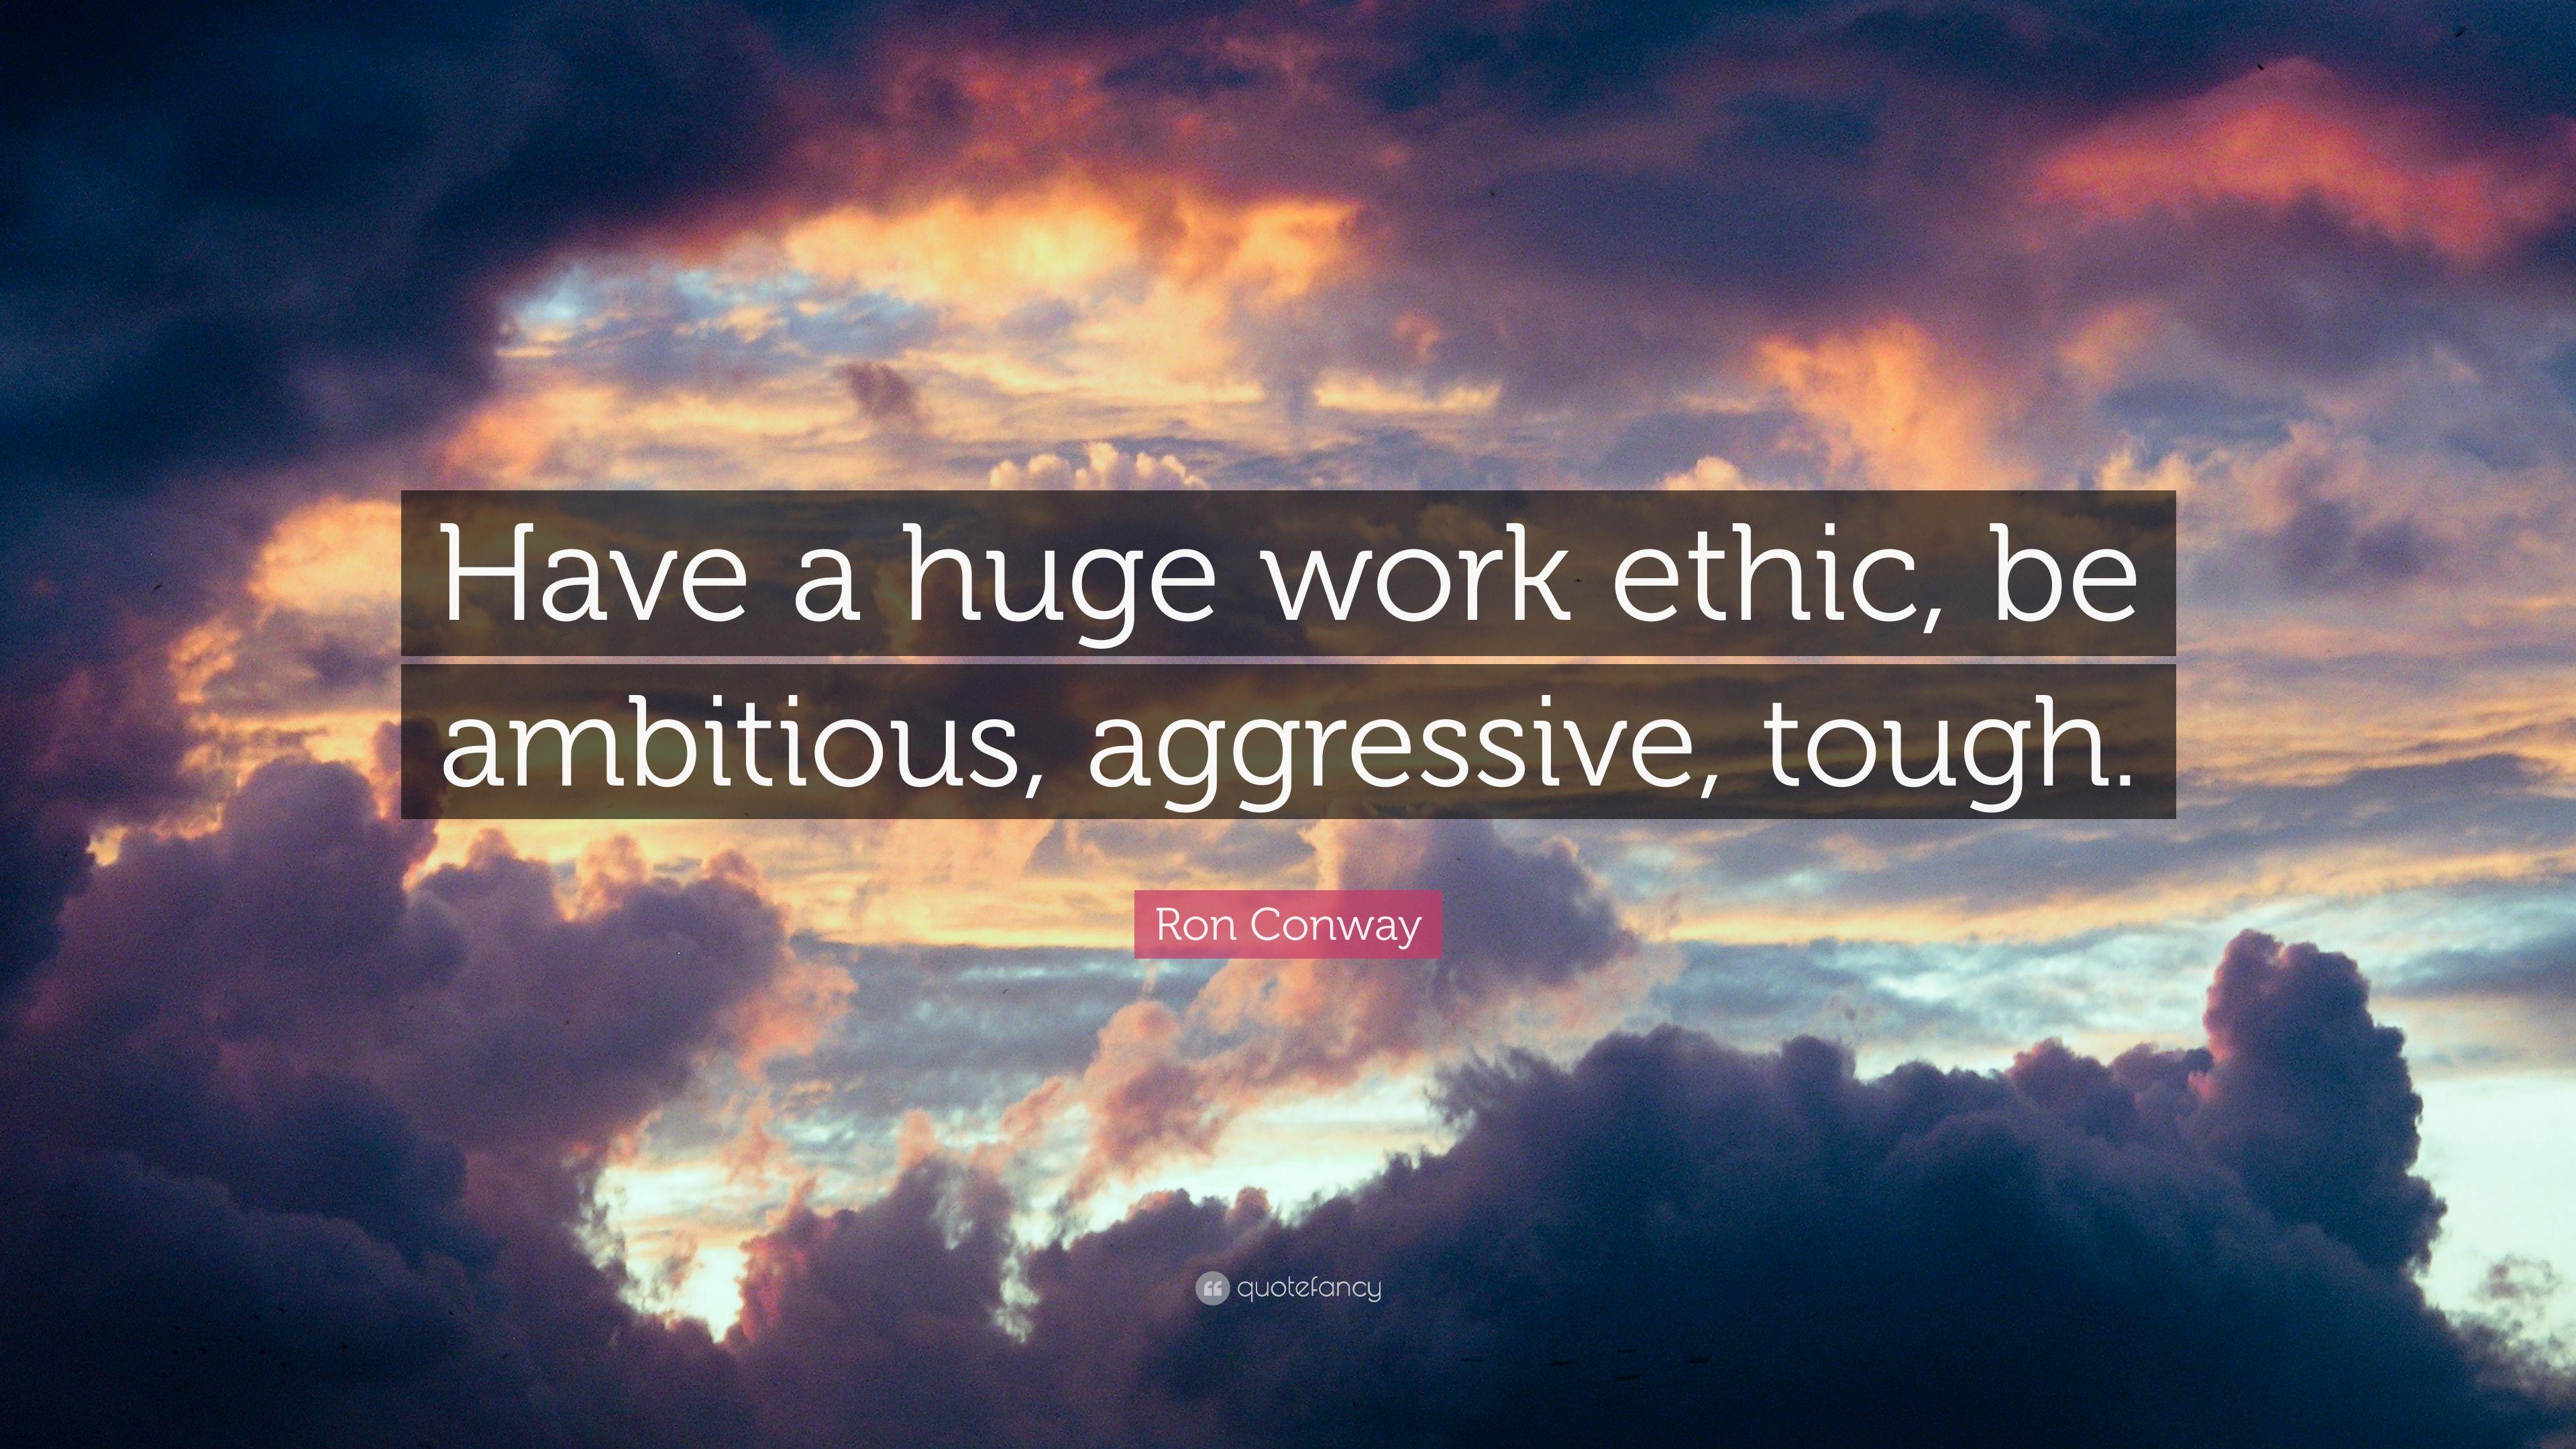 Ron Conway Quote: "Have a huge work ethic, be ambitious.